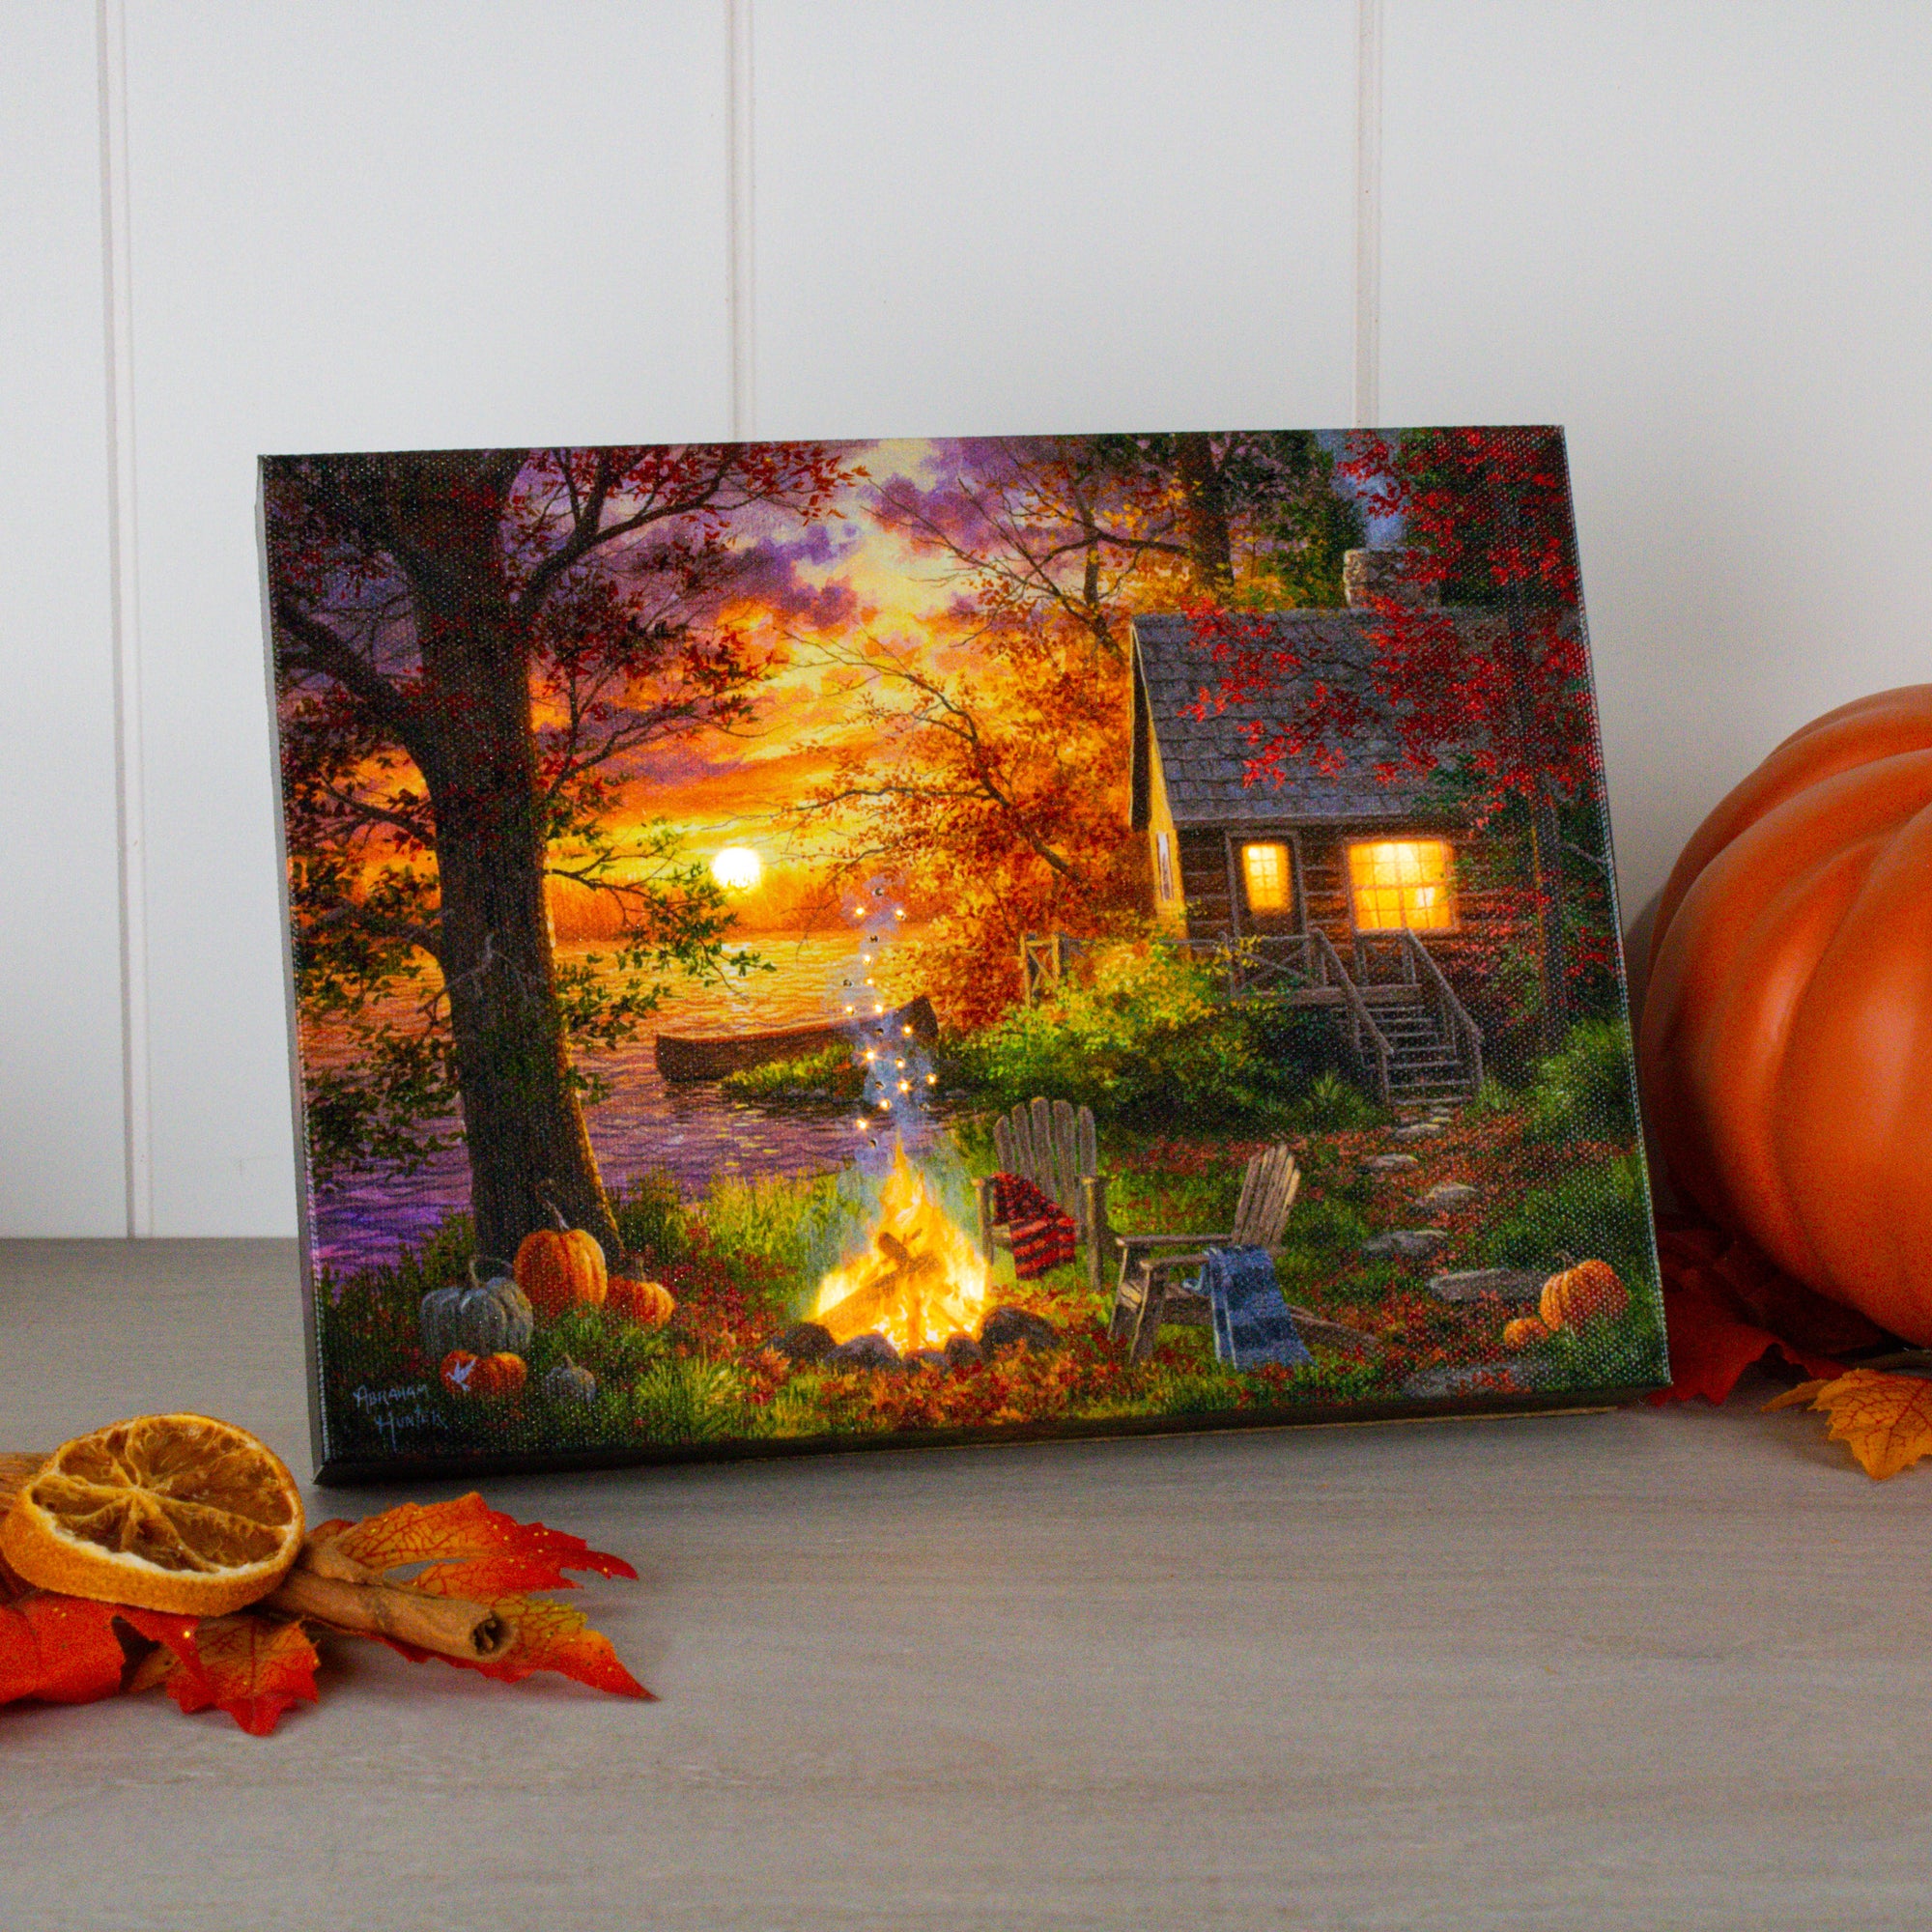 Sunset Serenity 8x6 Lighted Tabletop Canvas